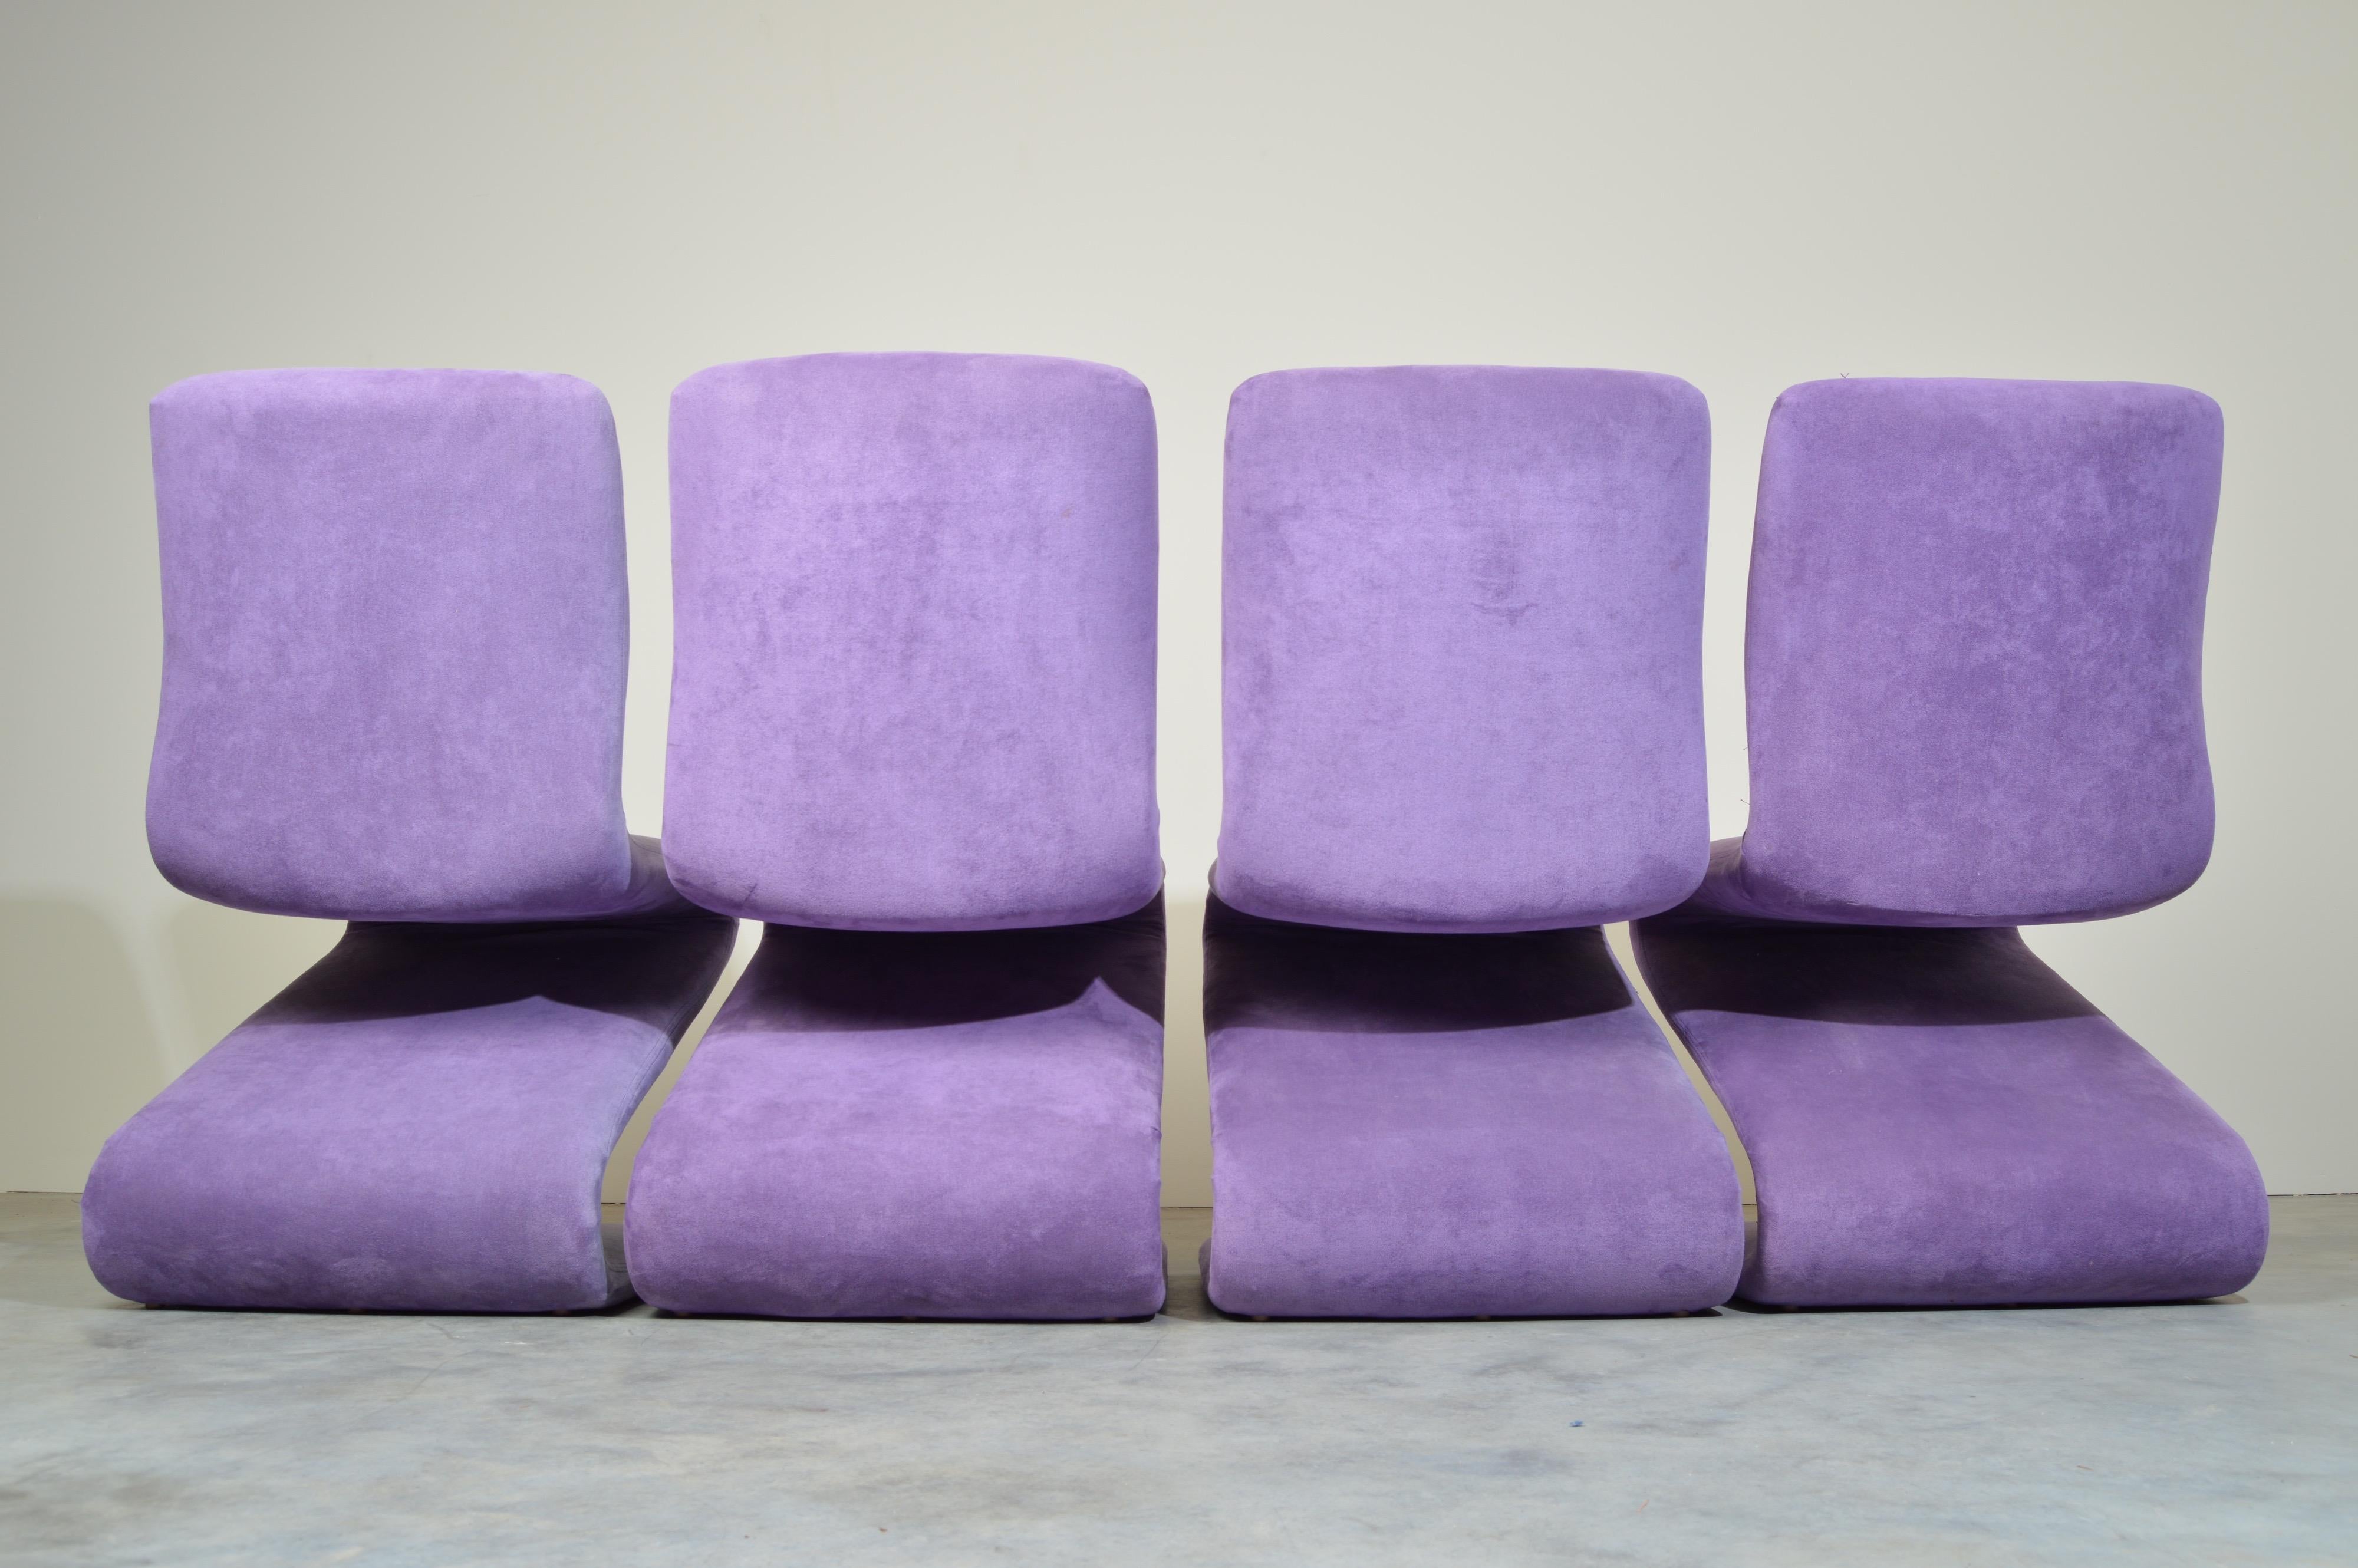 American Set of 4 S Form Dining Chairs in Ultrasuede Attributed to Verner Panton